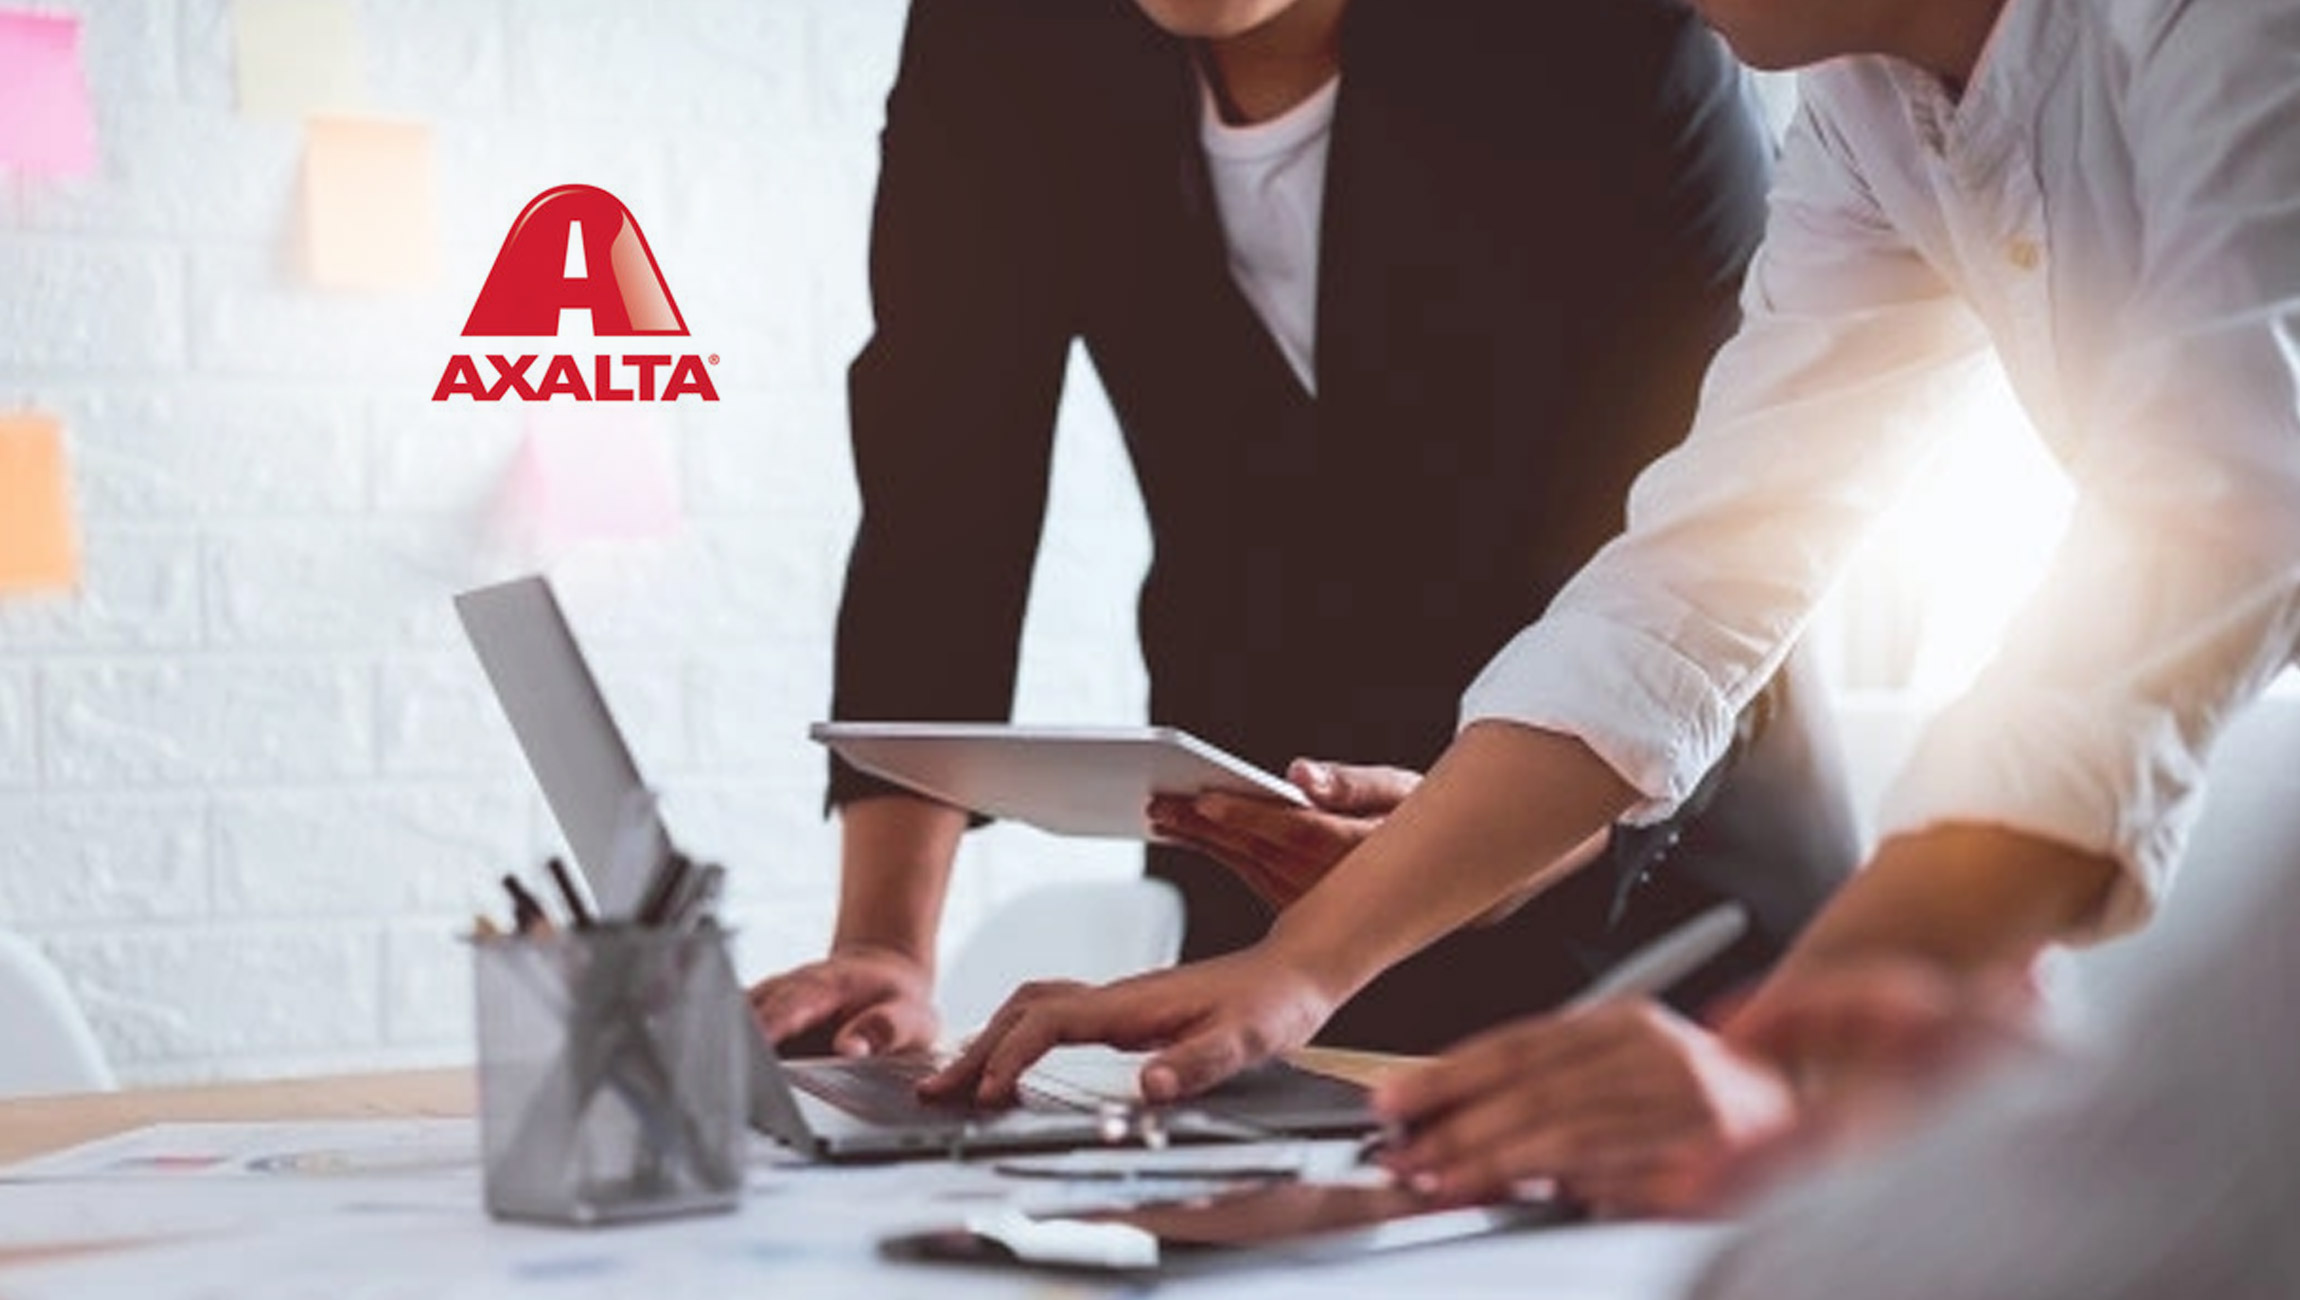 Axalta-Updates-Financial-Guidance-to-Reflect-Ongoing-Impacts-of-Customer-Supply-Chain-Shortages-and-Raw-Material-and-Logistics-Constraints